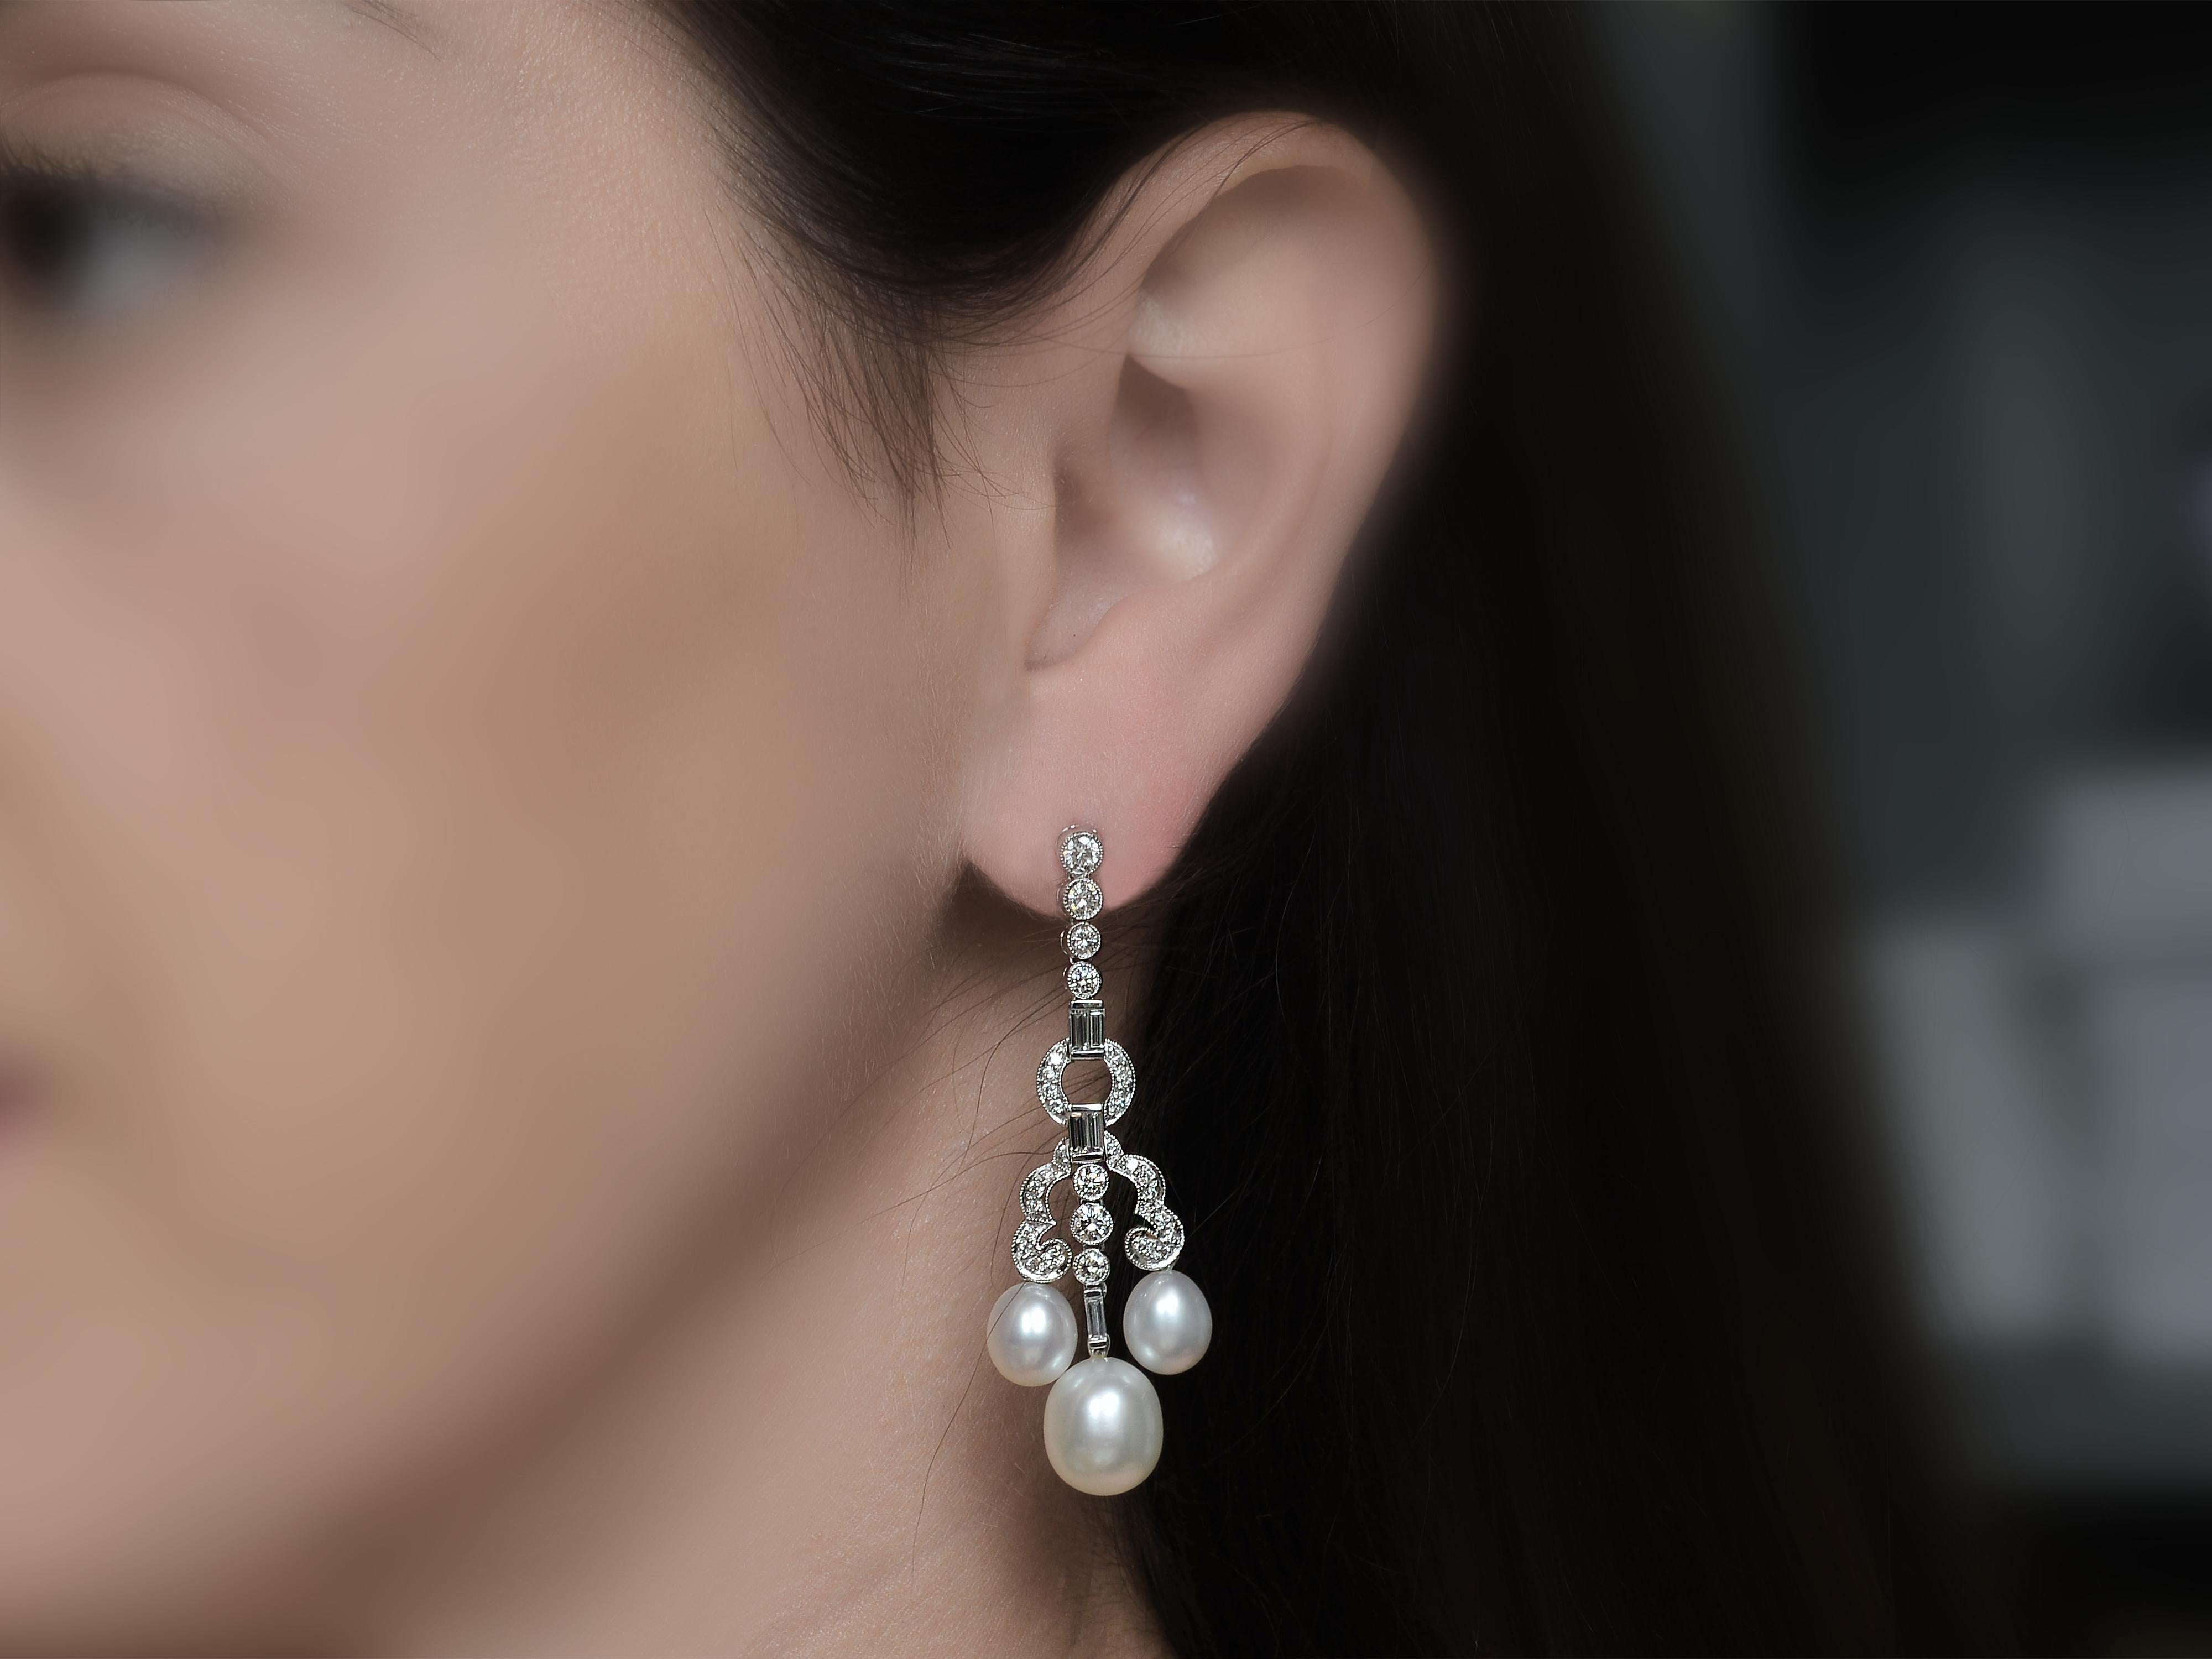 These Elegant Platinum Pearl Drop Earrings Are Accented with 65 Round Diamonds & 10 Baguette Diamonds of SI Clarity & G Color. All Diamonds Total 2.35 Carats. The Chandelier Terminates with Four Oval Cultured Pearls Measuring 7.5 Millimeters & Two